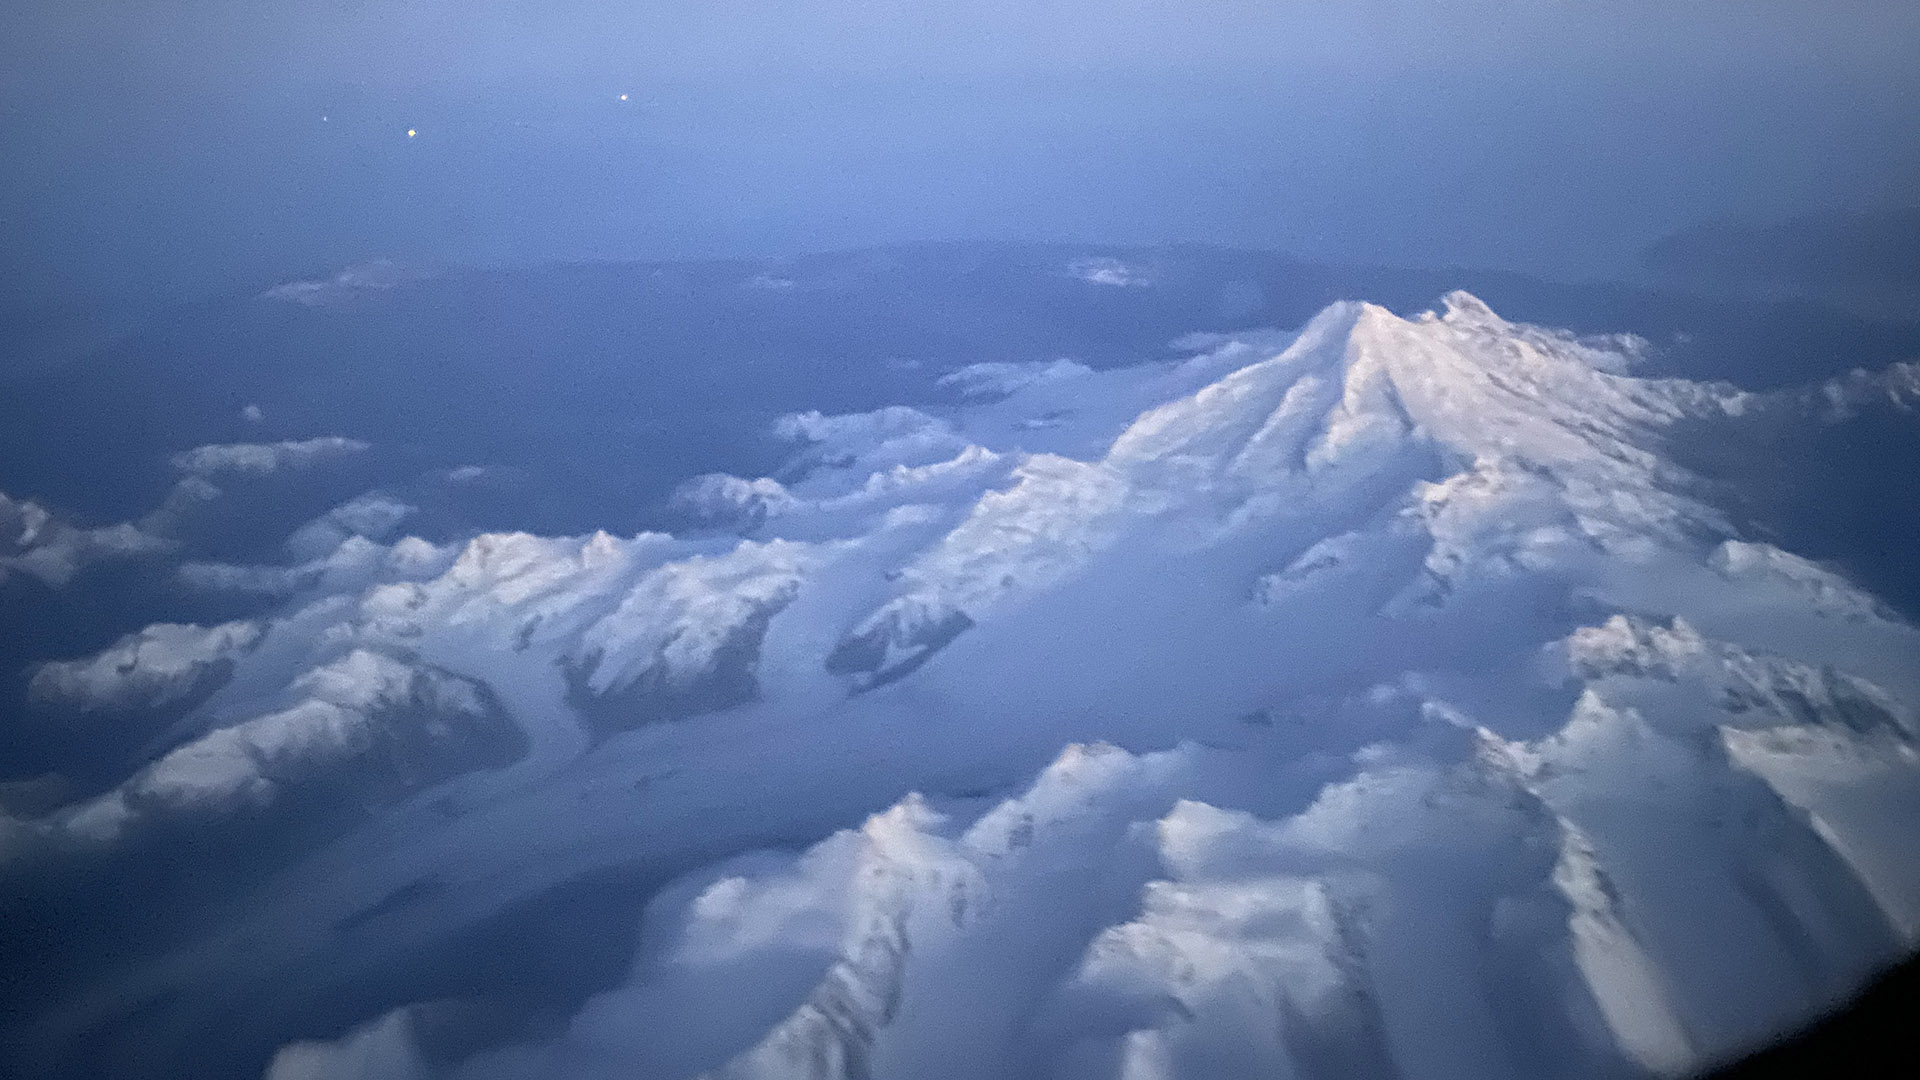 A glacier flowing from a volcano. Always get a window seat when flying in Alaska.